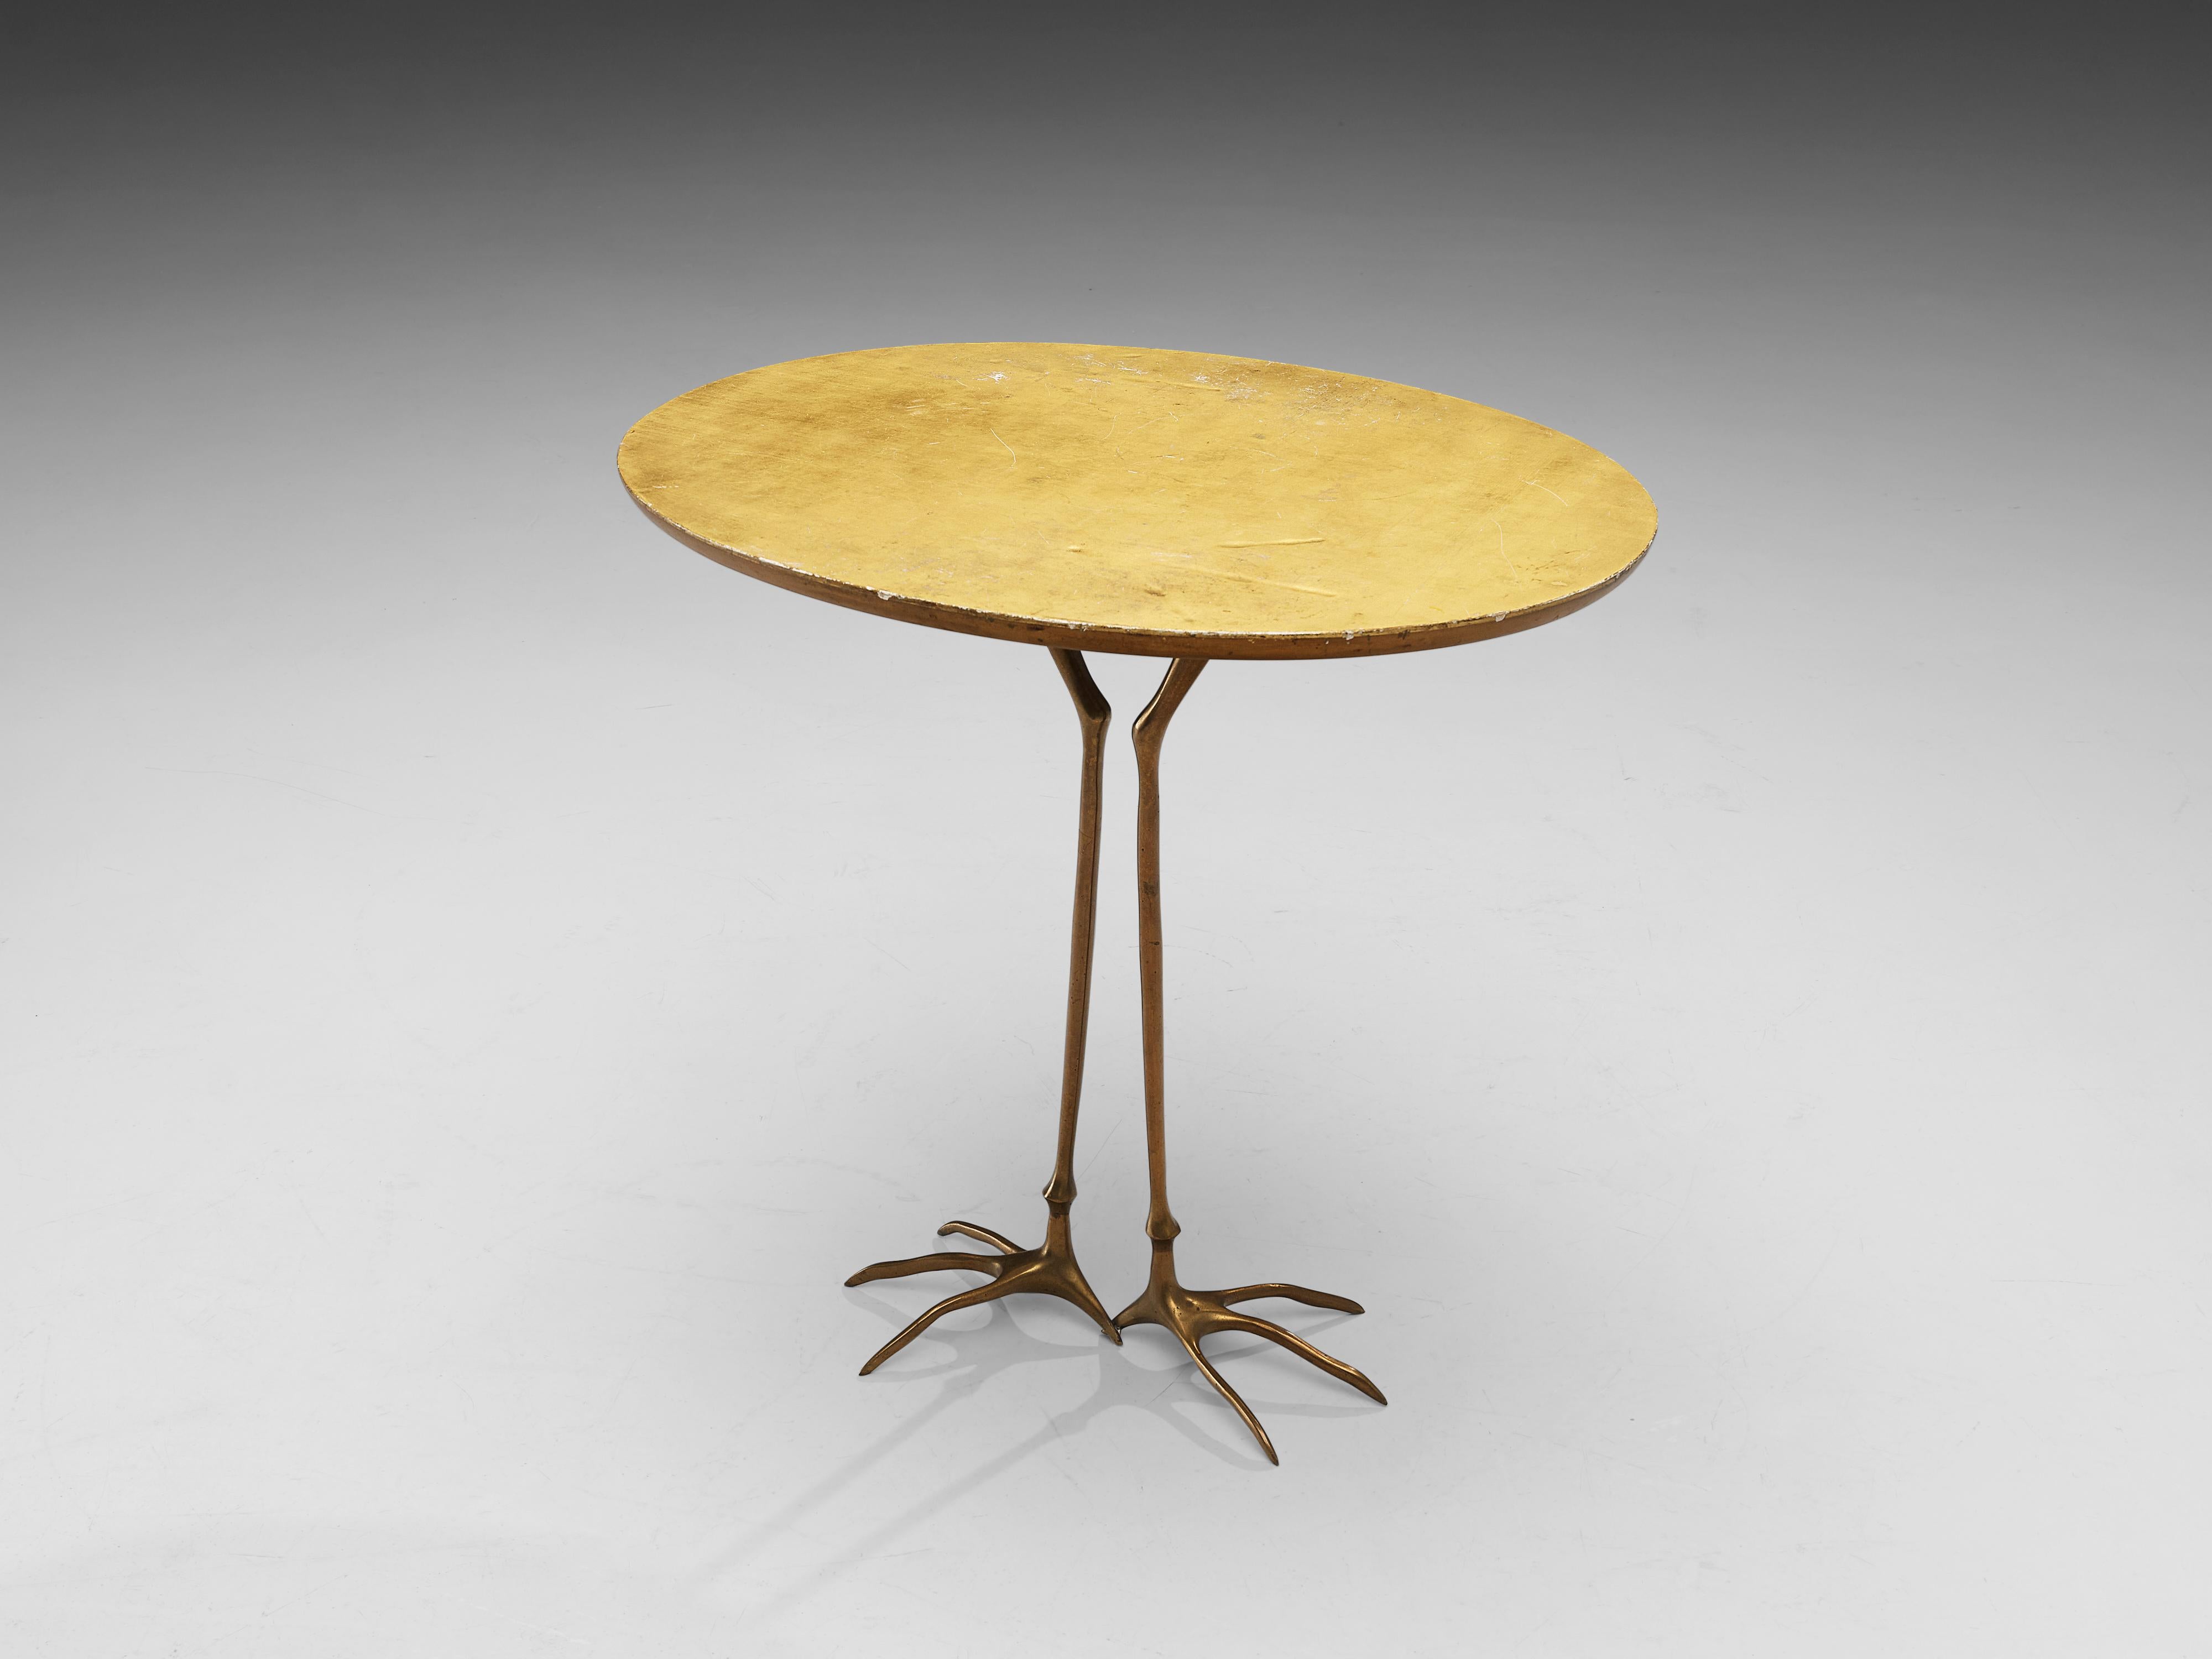 German Meret Oppenheim 'Traccia' Coffee Table in Gilded Wood and Brass 